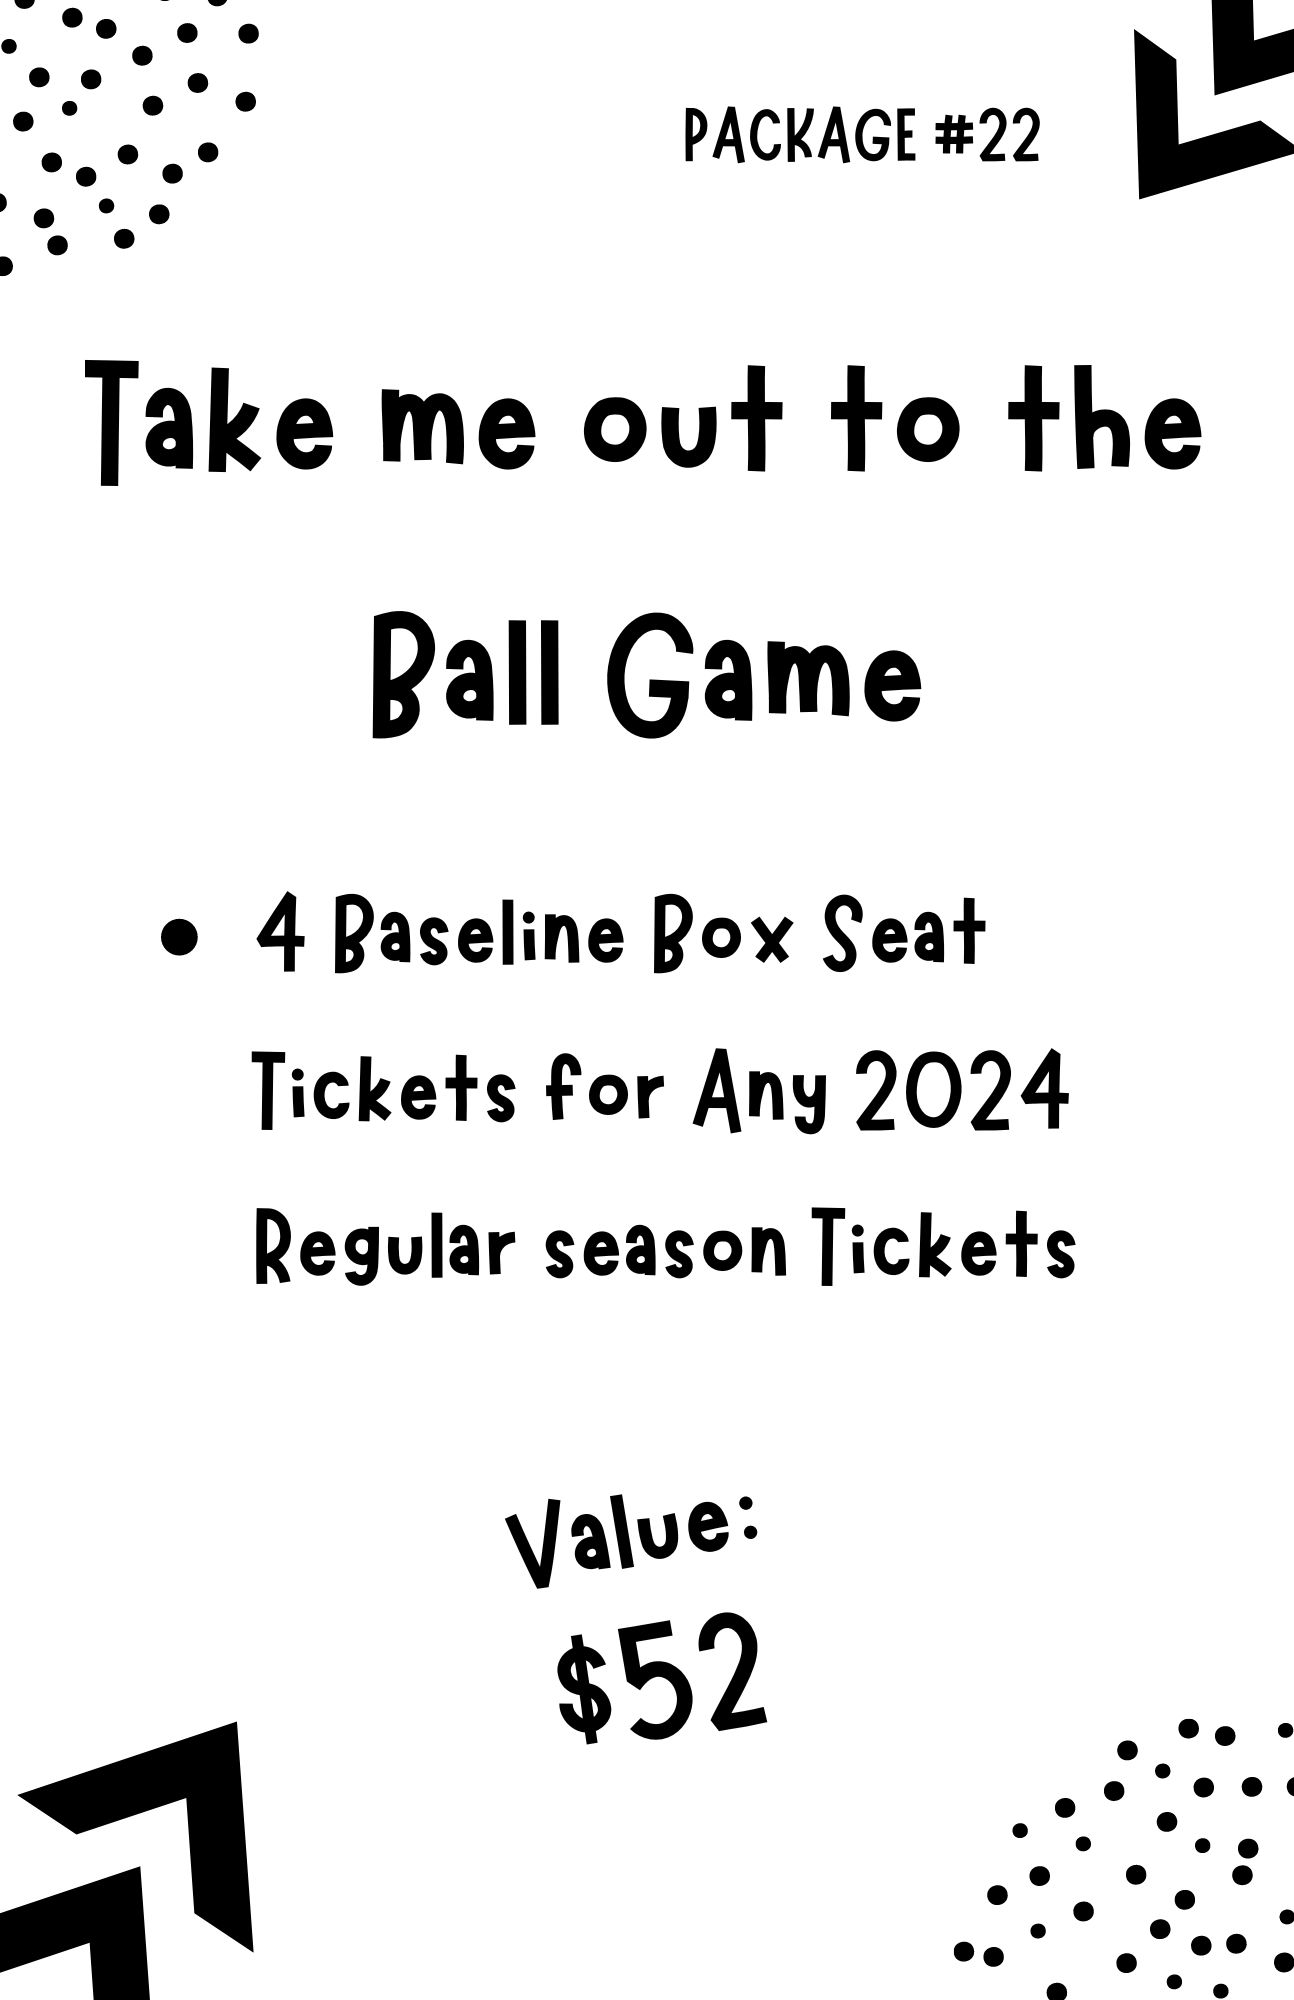 Auction Item#22: Take me out to the Ball Game!